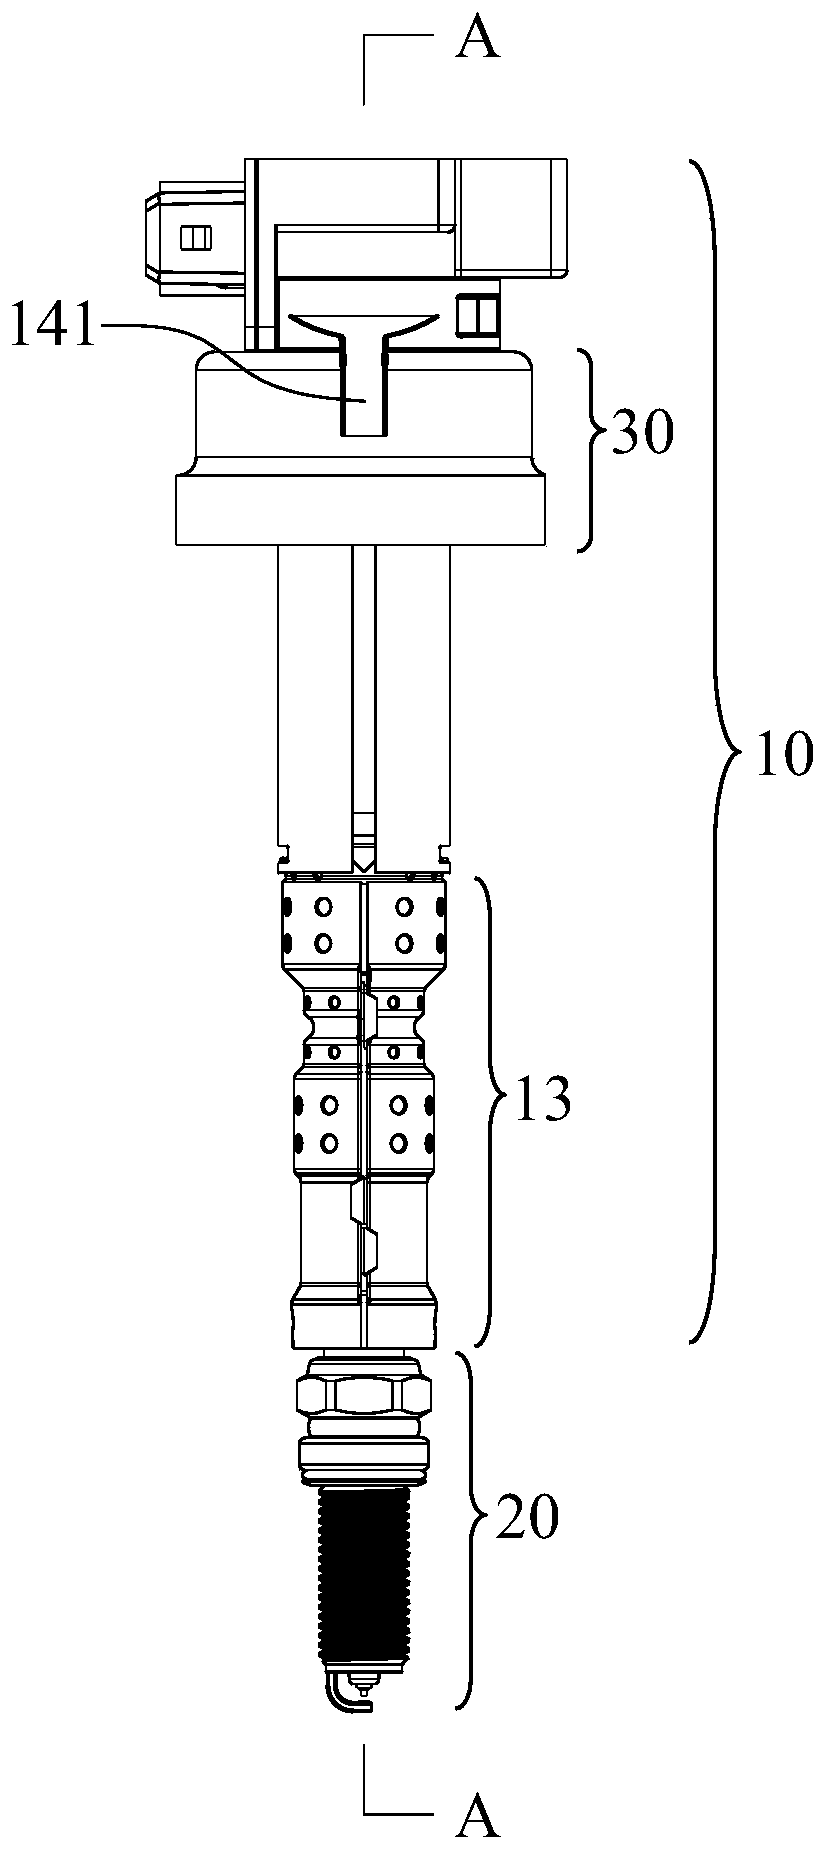 Installation structure of the ignition coil